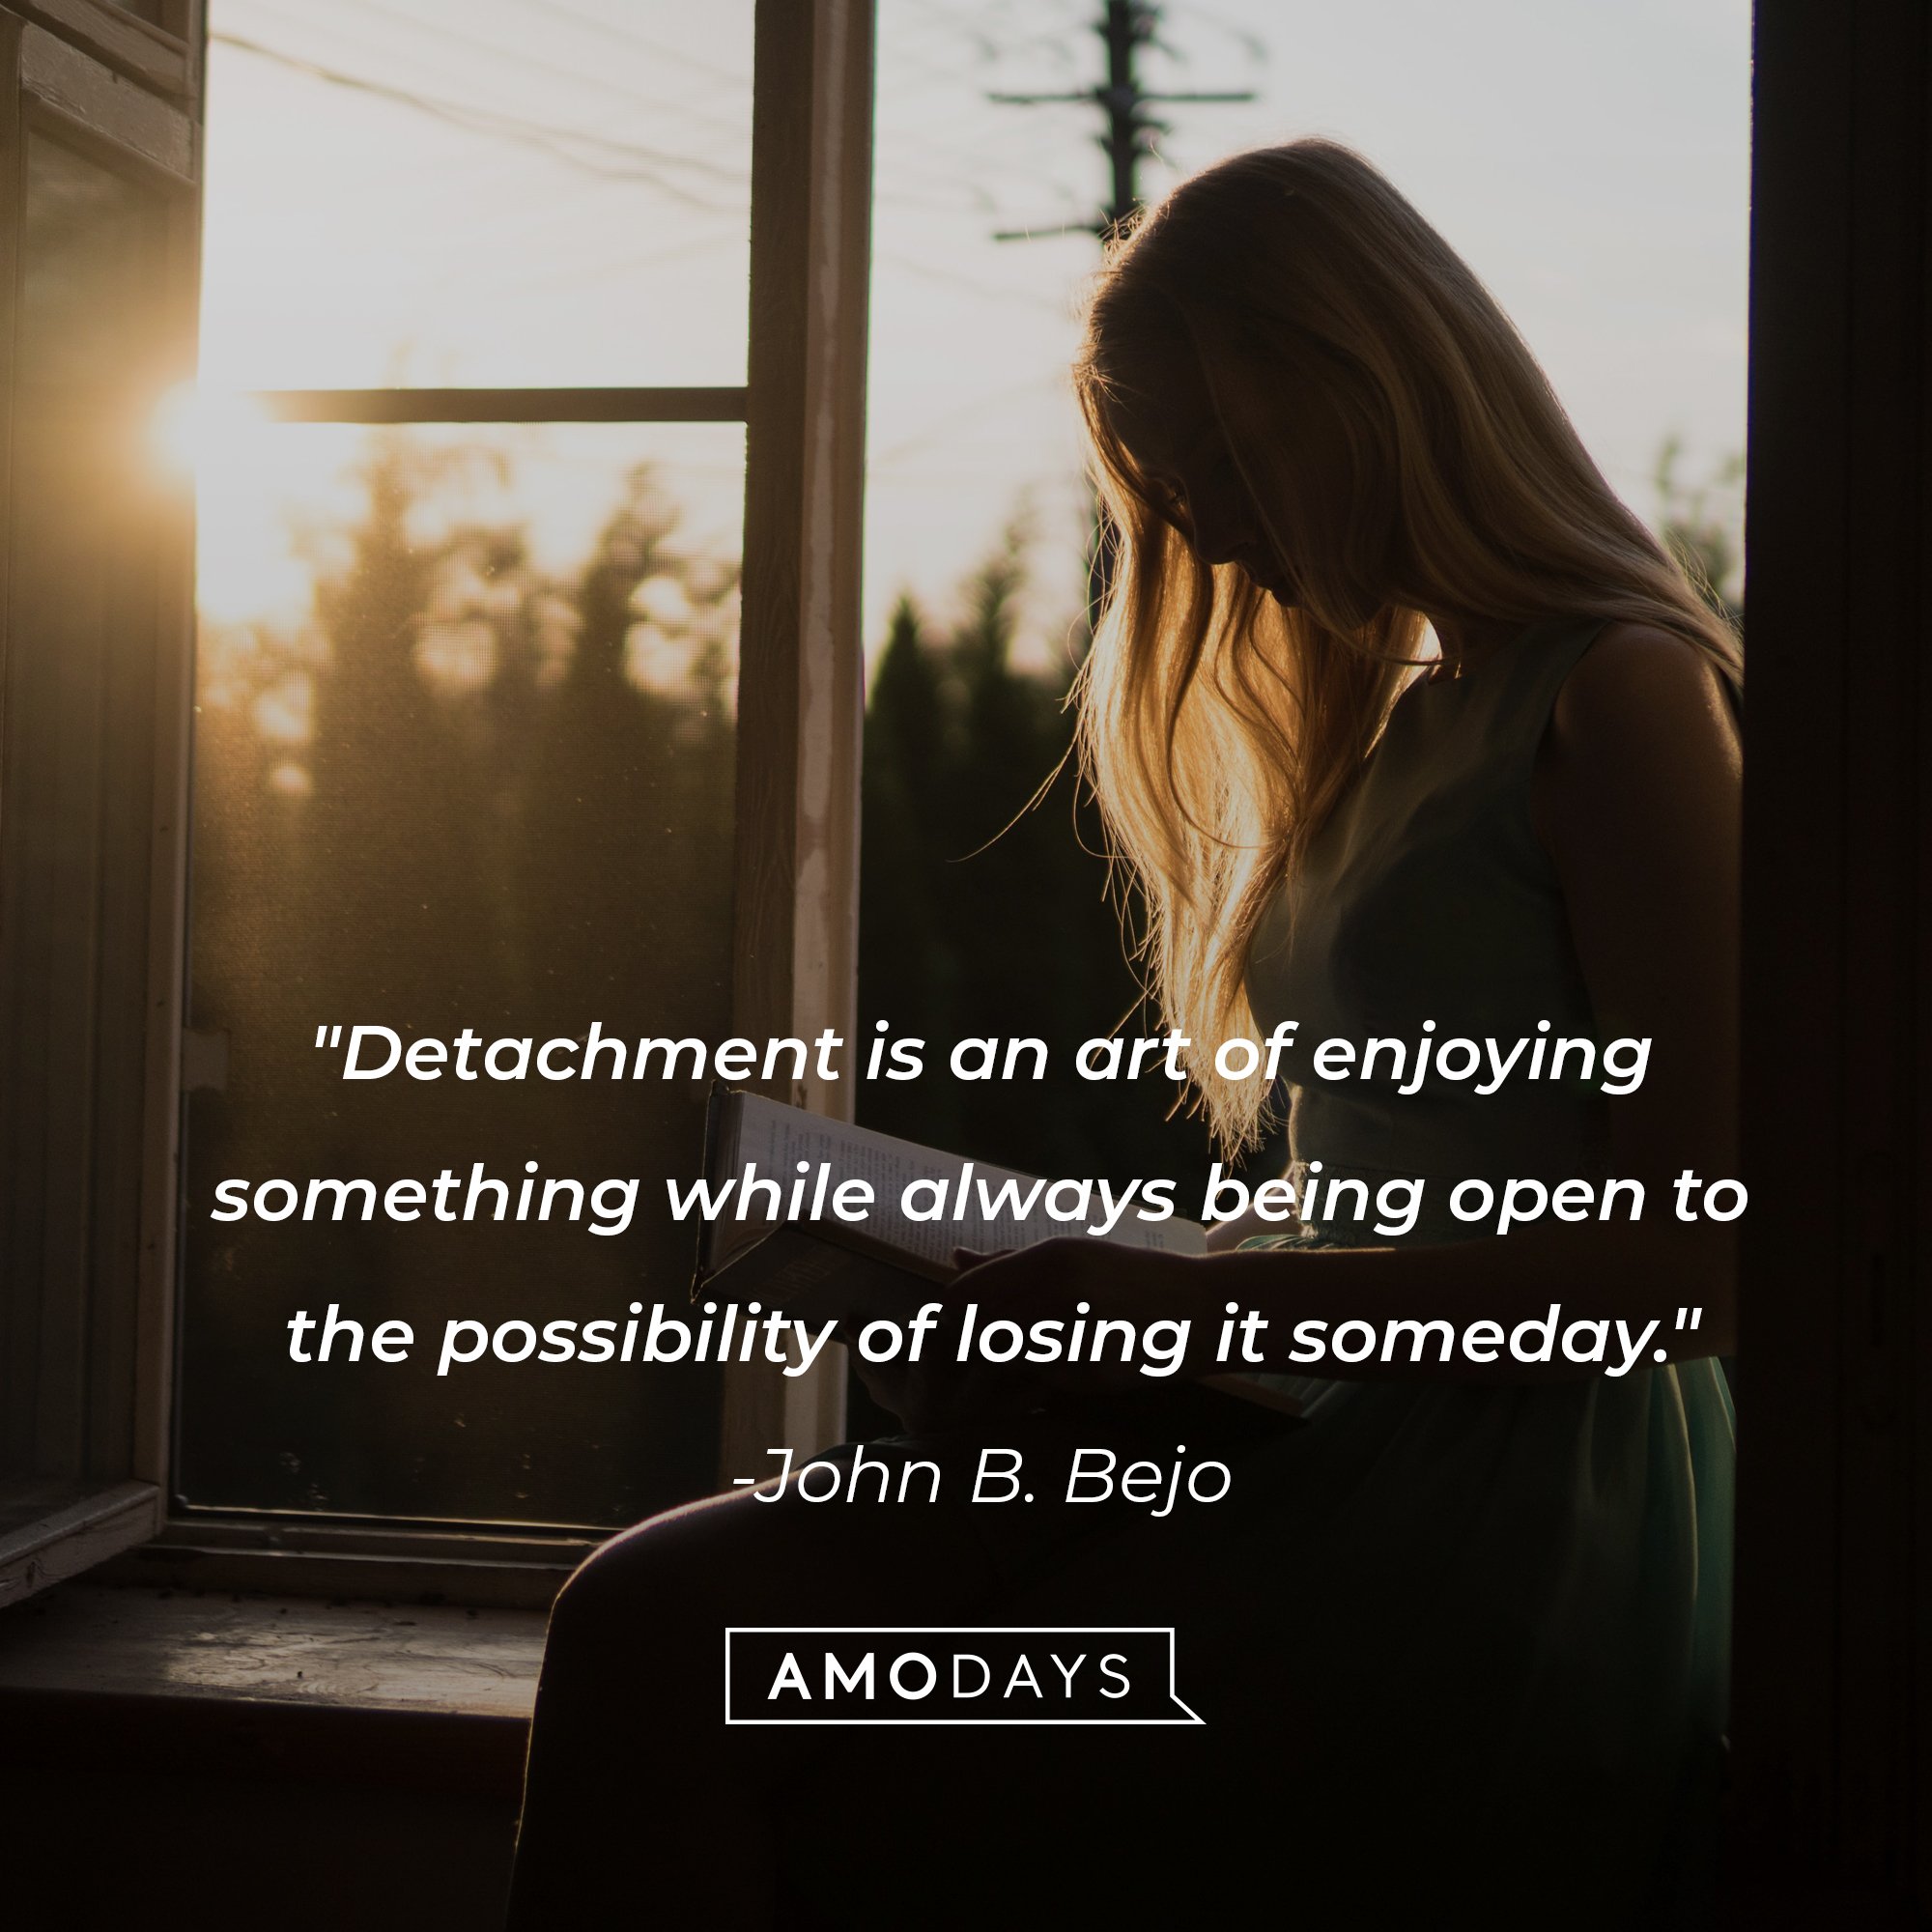 John B. Bejo's quote: "Detachment is an art of enjoying something while always being open to the possibility of losing it someday." | Image: AmoDays